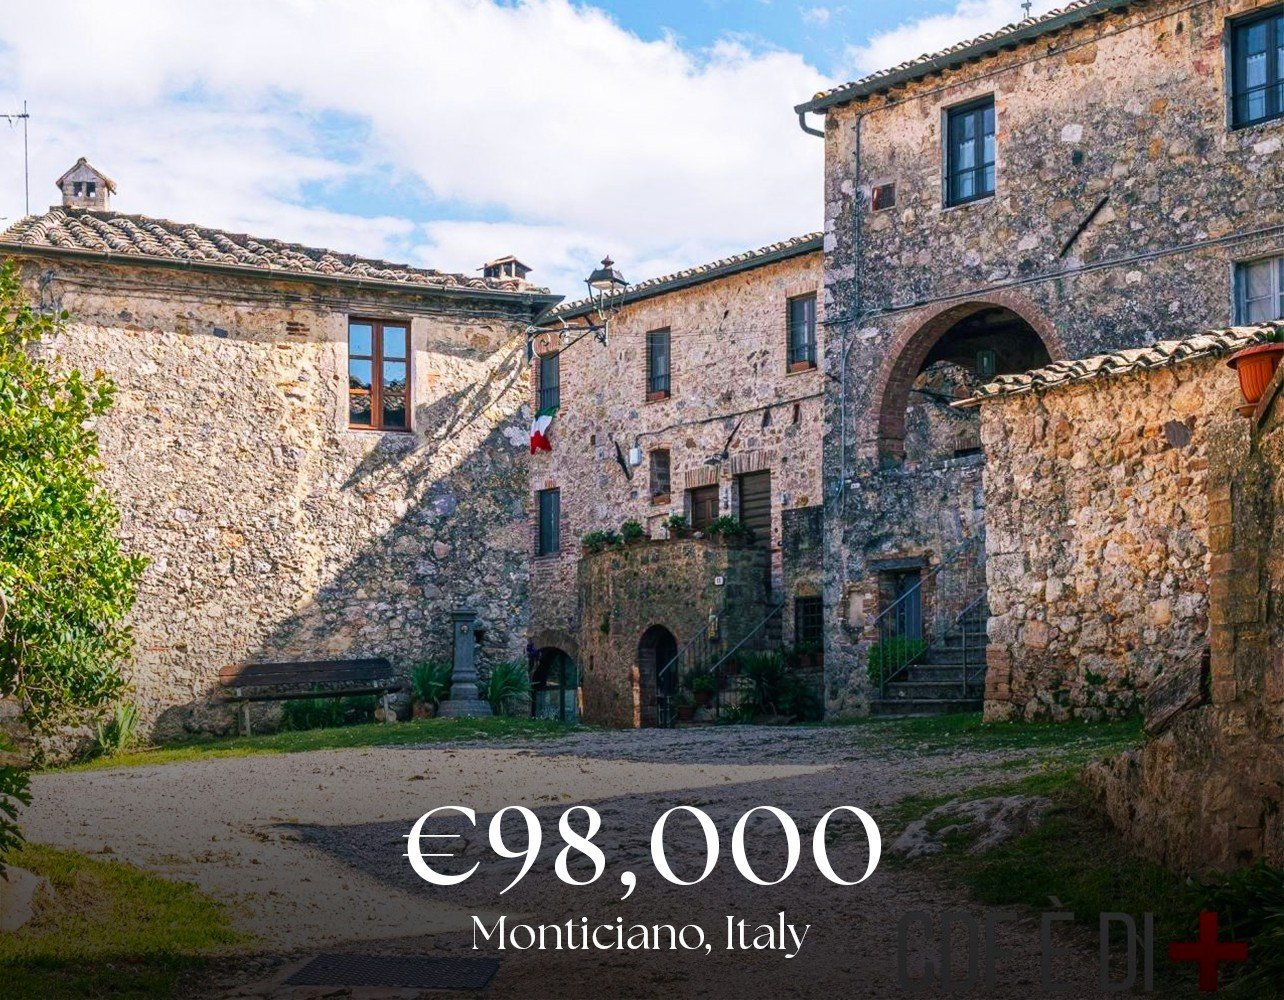 Imagine waking up to the sound of birds chirping and the gentle rustle of leaves in the wind at your enchanting 90 sqm retreat in Monticiano. This delightful 2 bedroom, 2 bathroom apartment exudes warmth and character, with its cozy fireplace, access